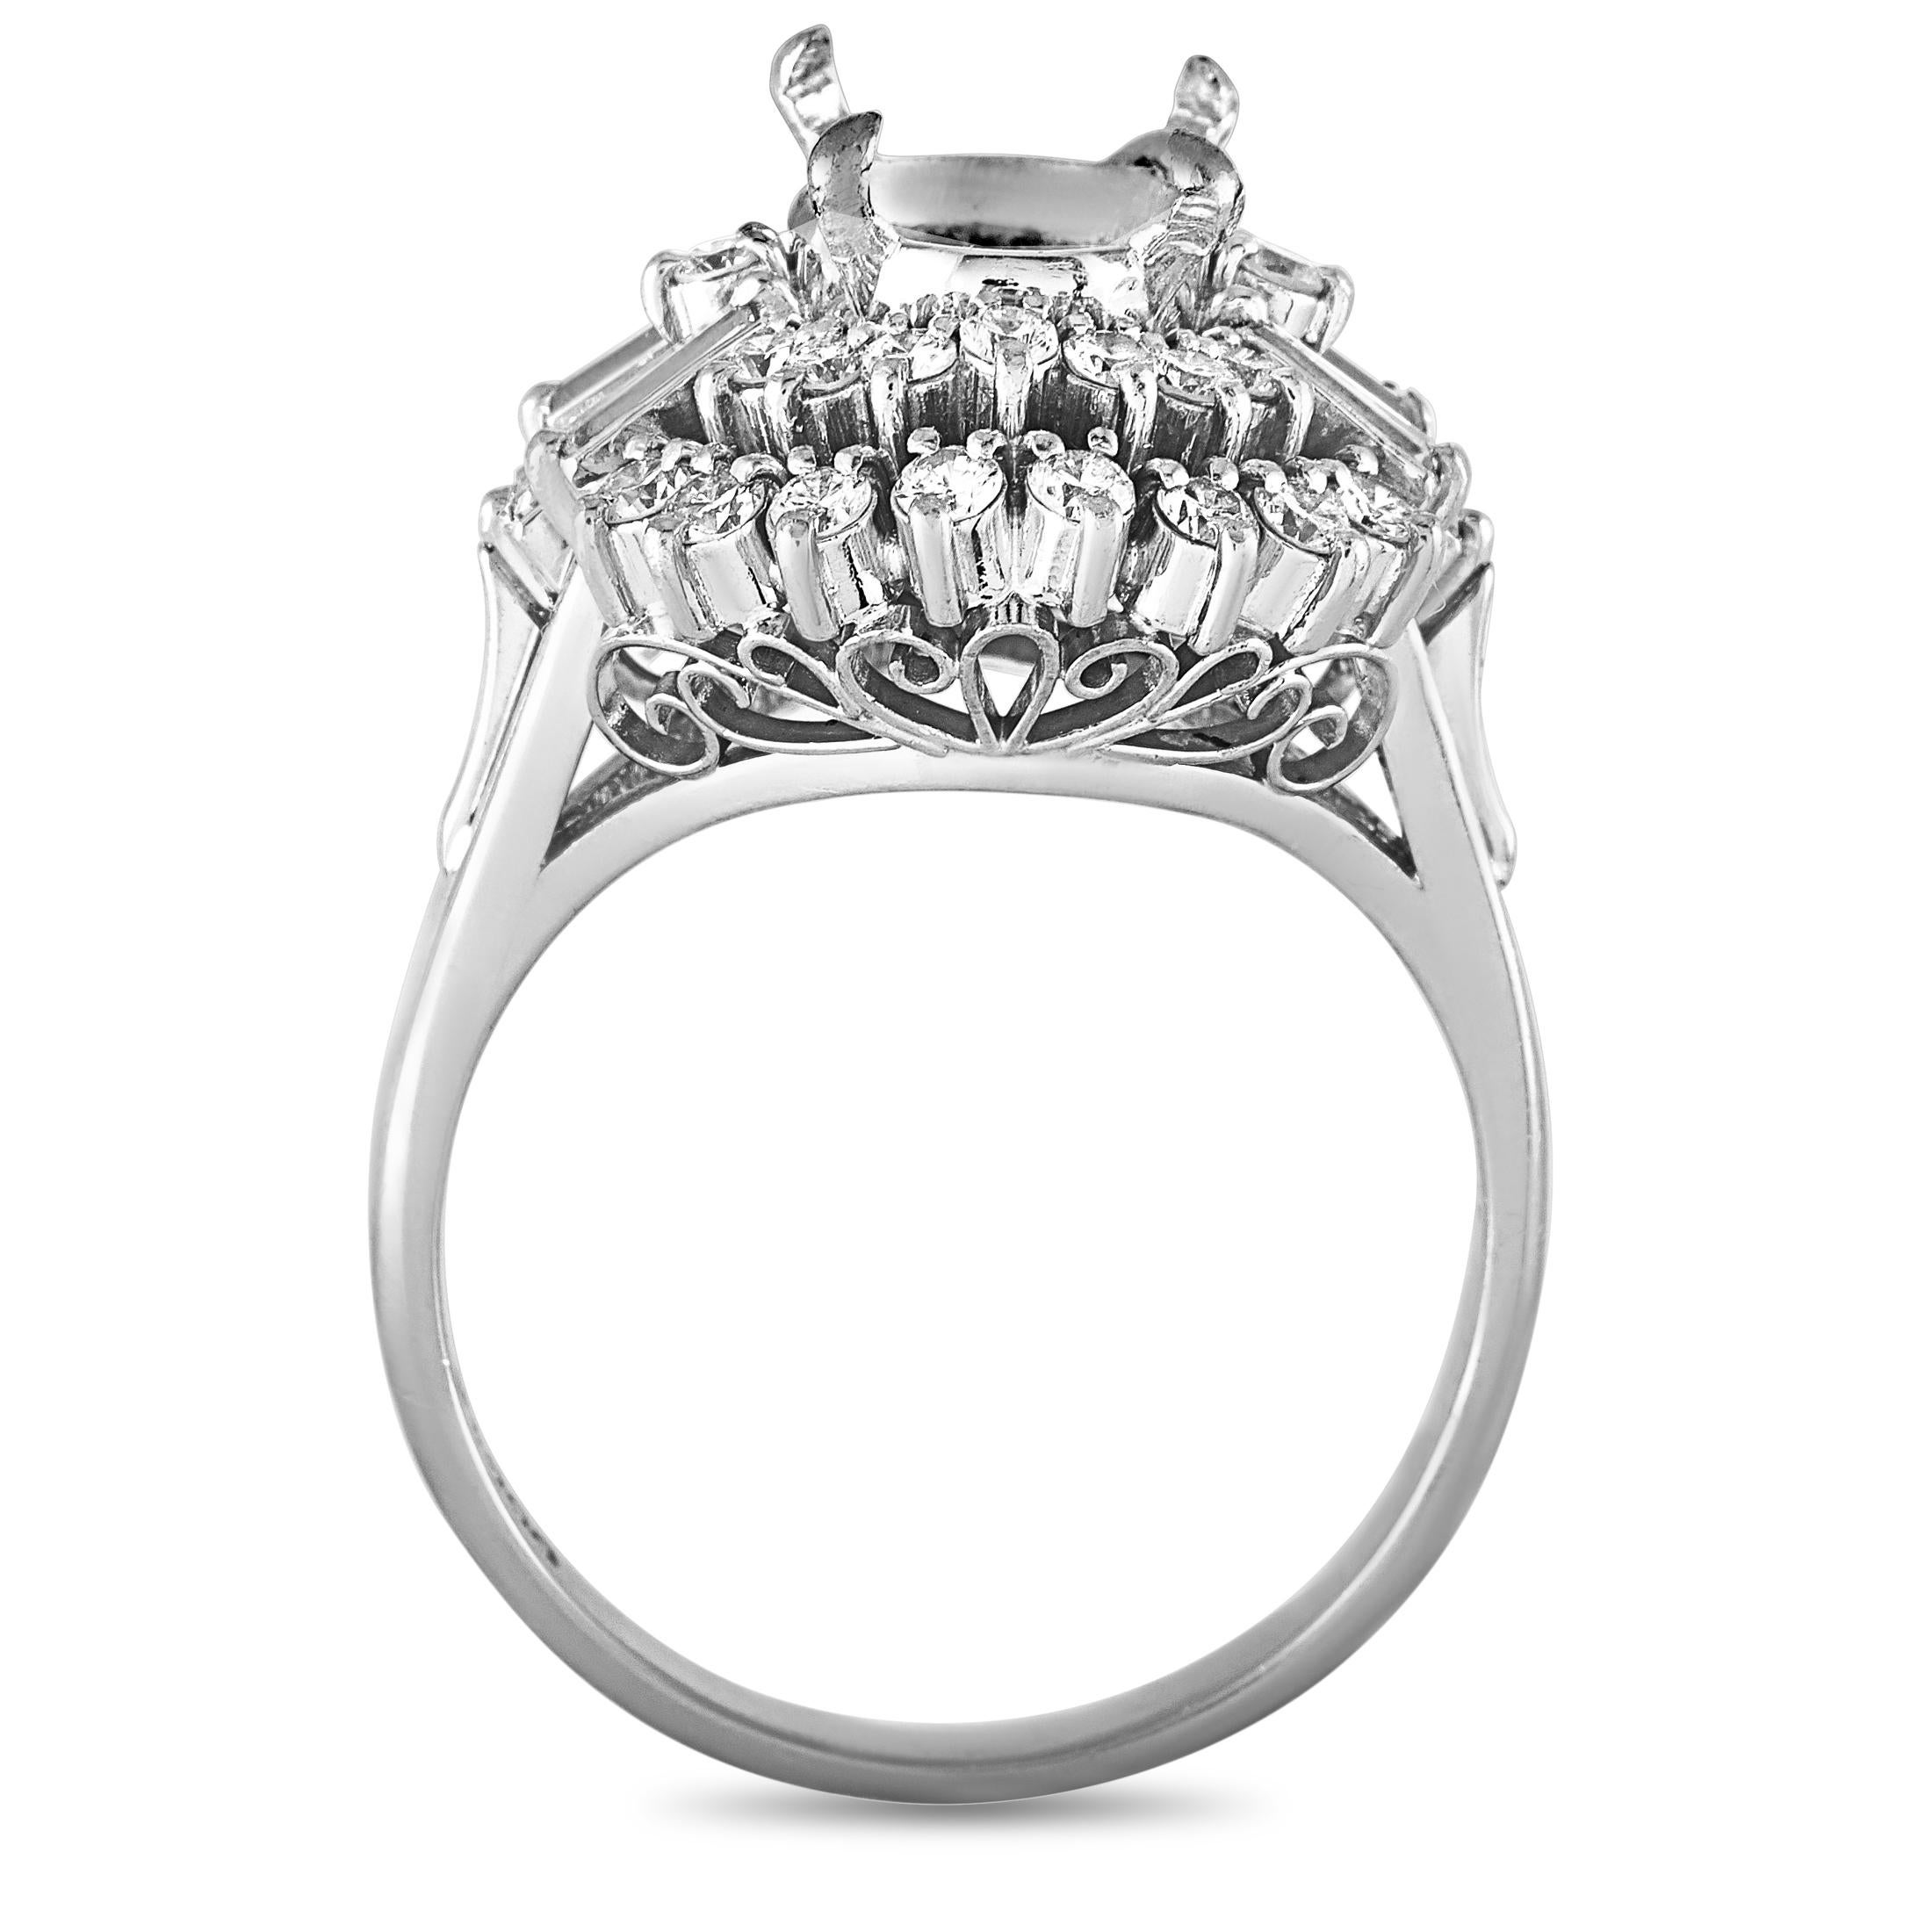 This mounting ring is made out of platinum and round and tapered baguette diamonds that total 0.85 carats. The ring weighs 8.4 grams and boasts band thickness of 2 mm and top height of 10 mm, while top dimensions measure 15 by 17 mm.
Ring Size: